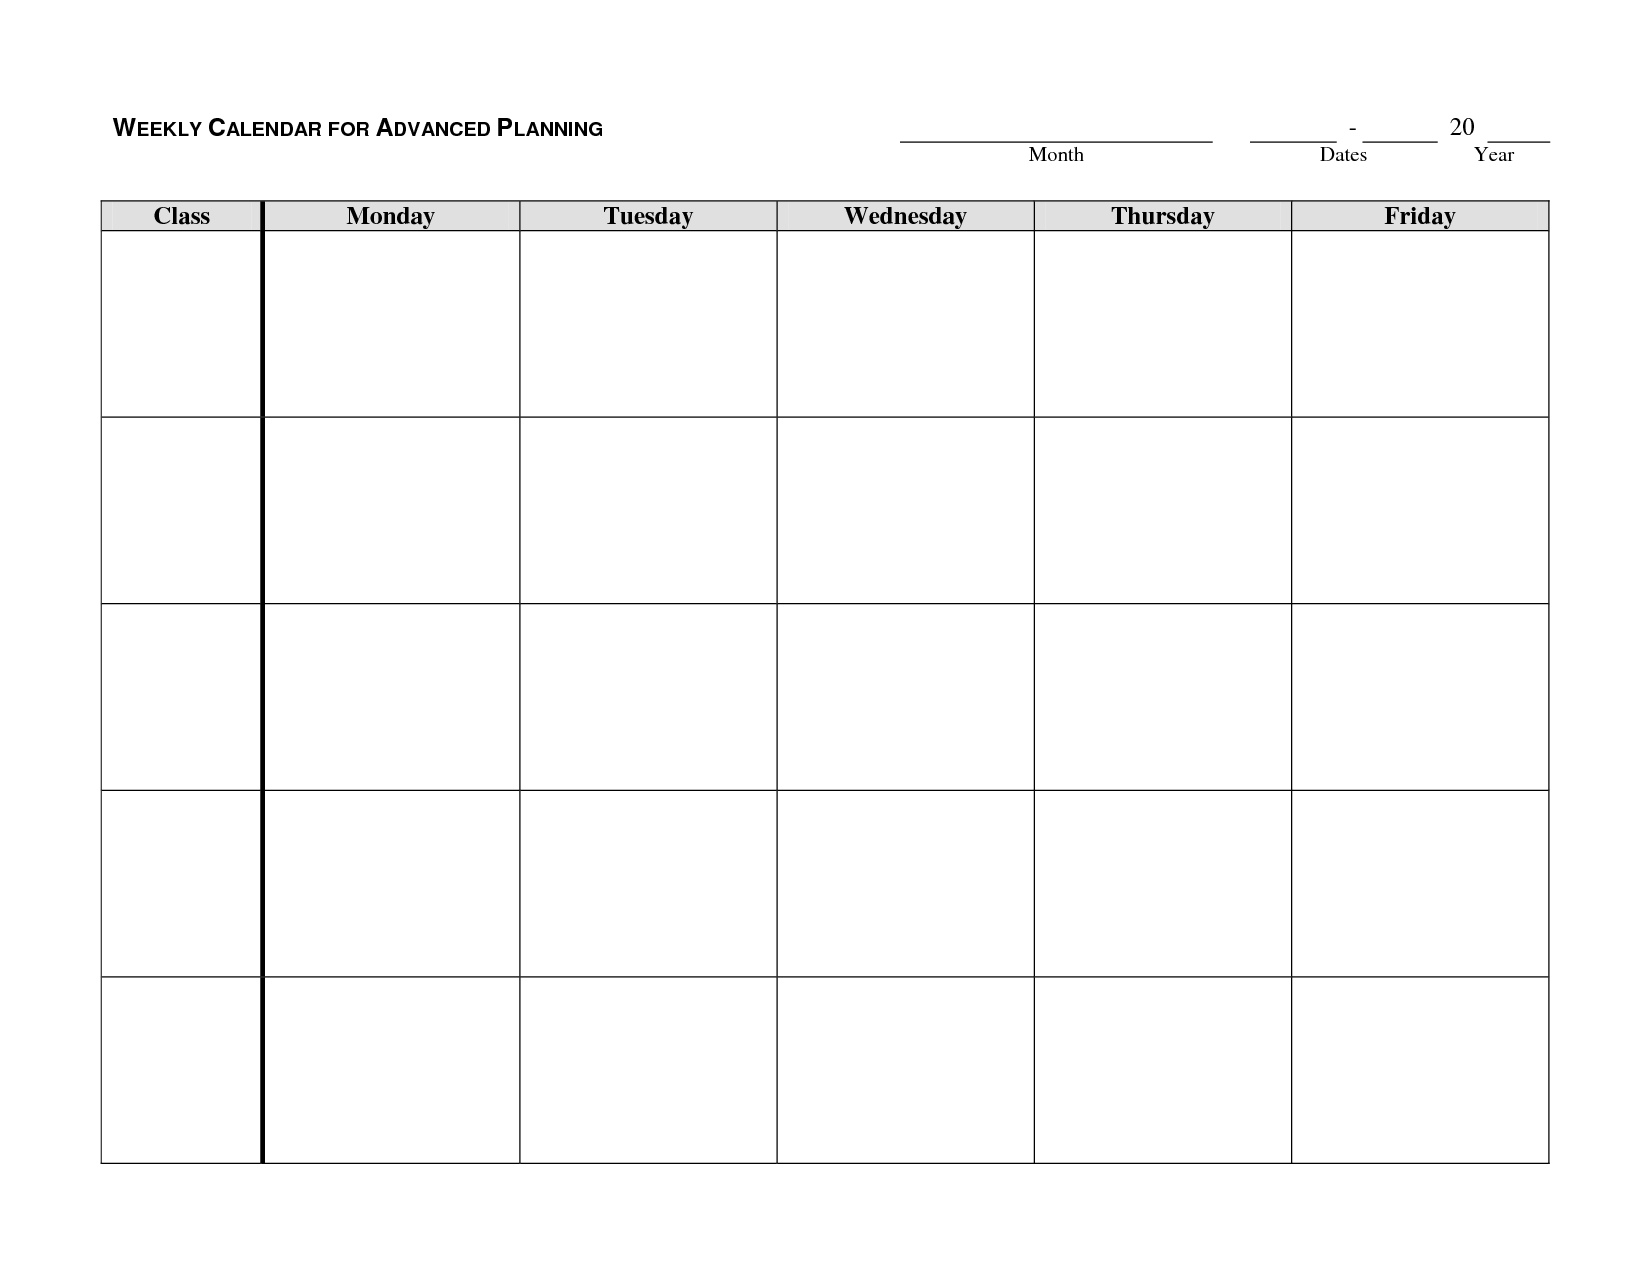 Weekly Calendar Template - Google Search | Autism/school-Weekly Calendar Templates Free Printable Monday-Friday